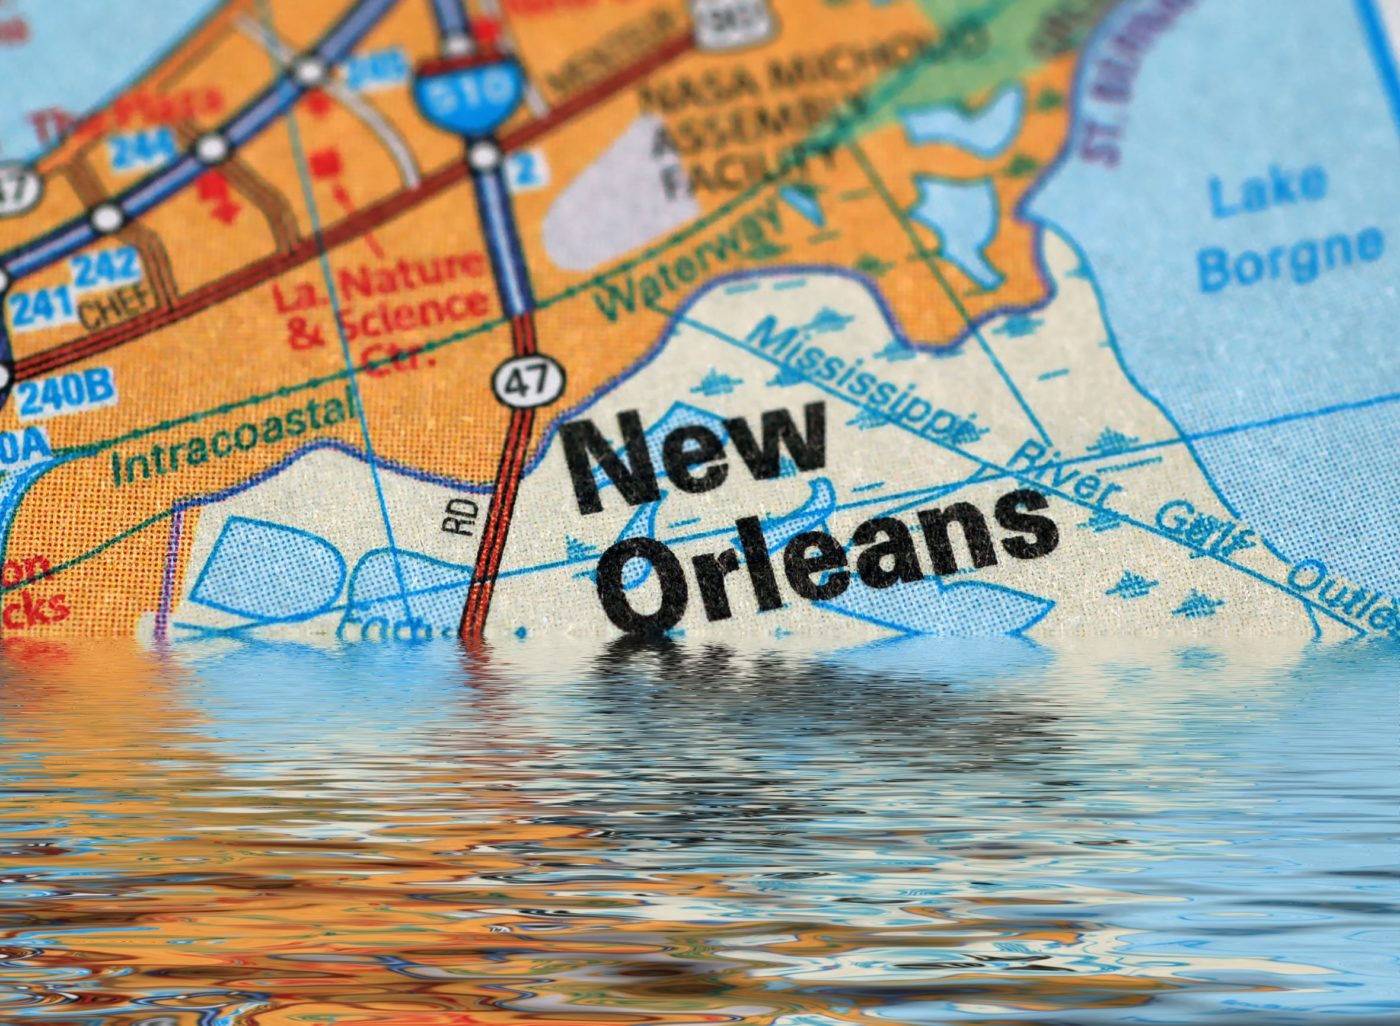 New Orleans Driving Laws